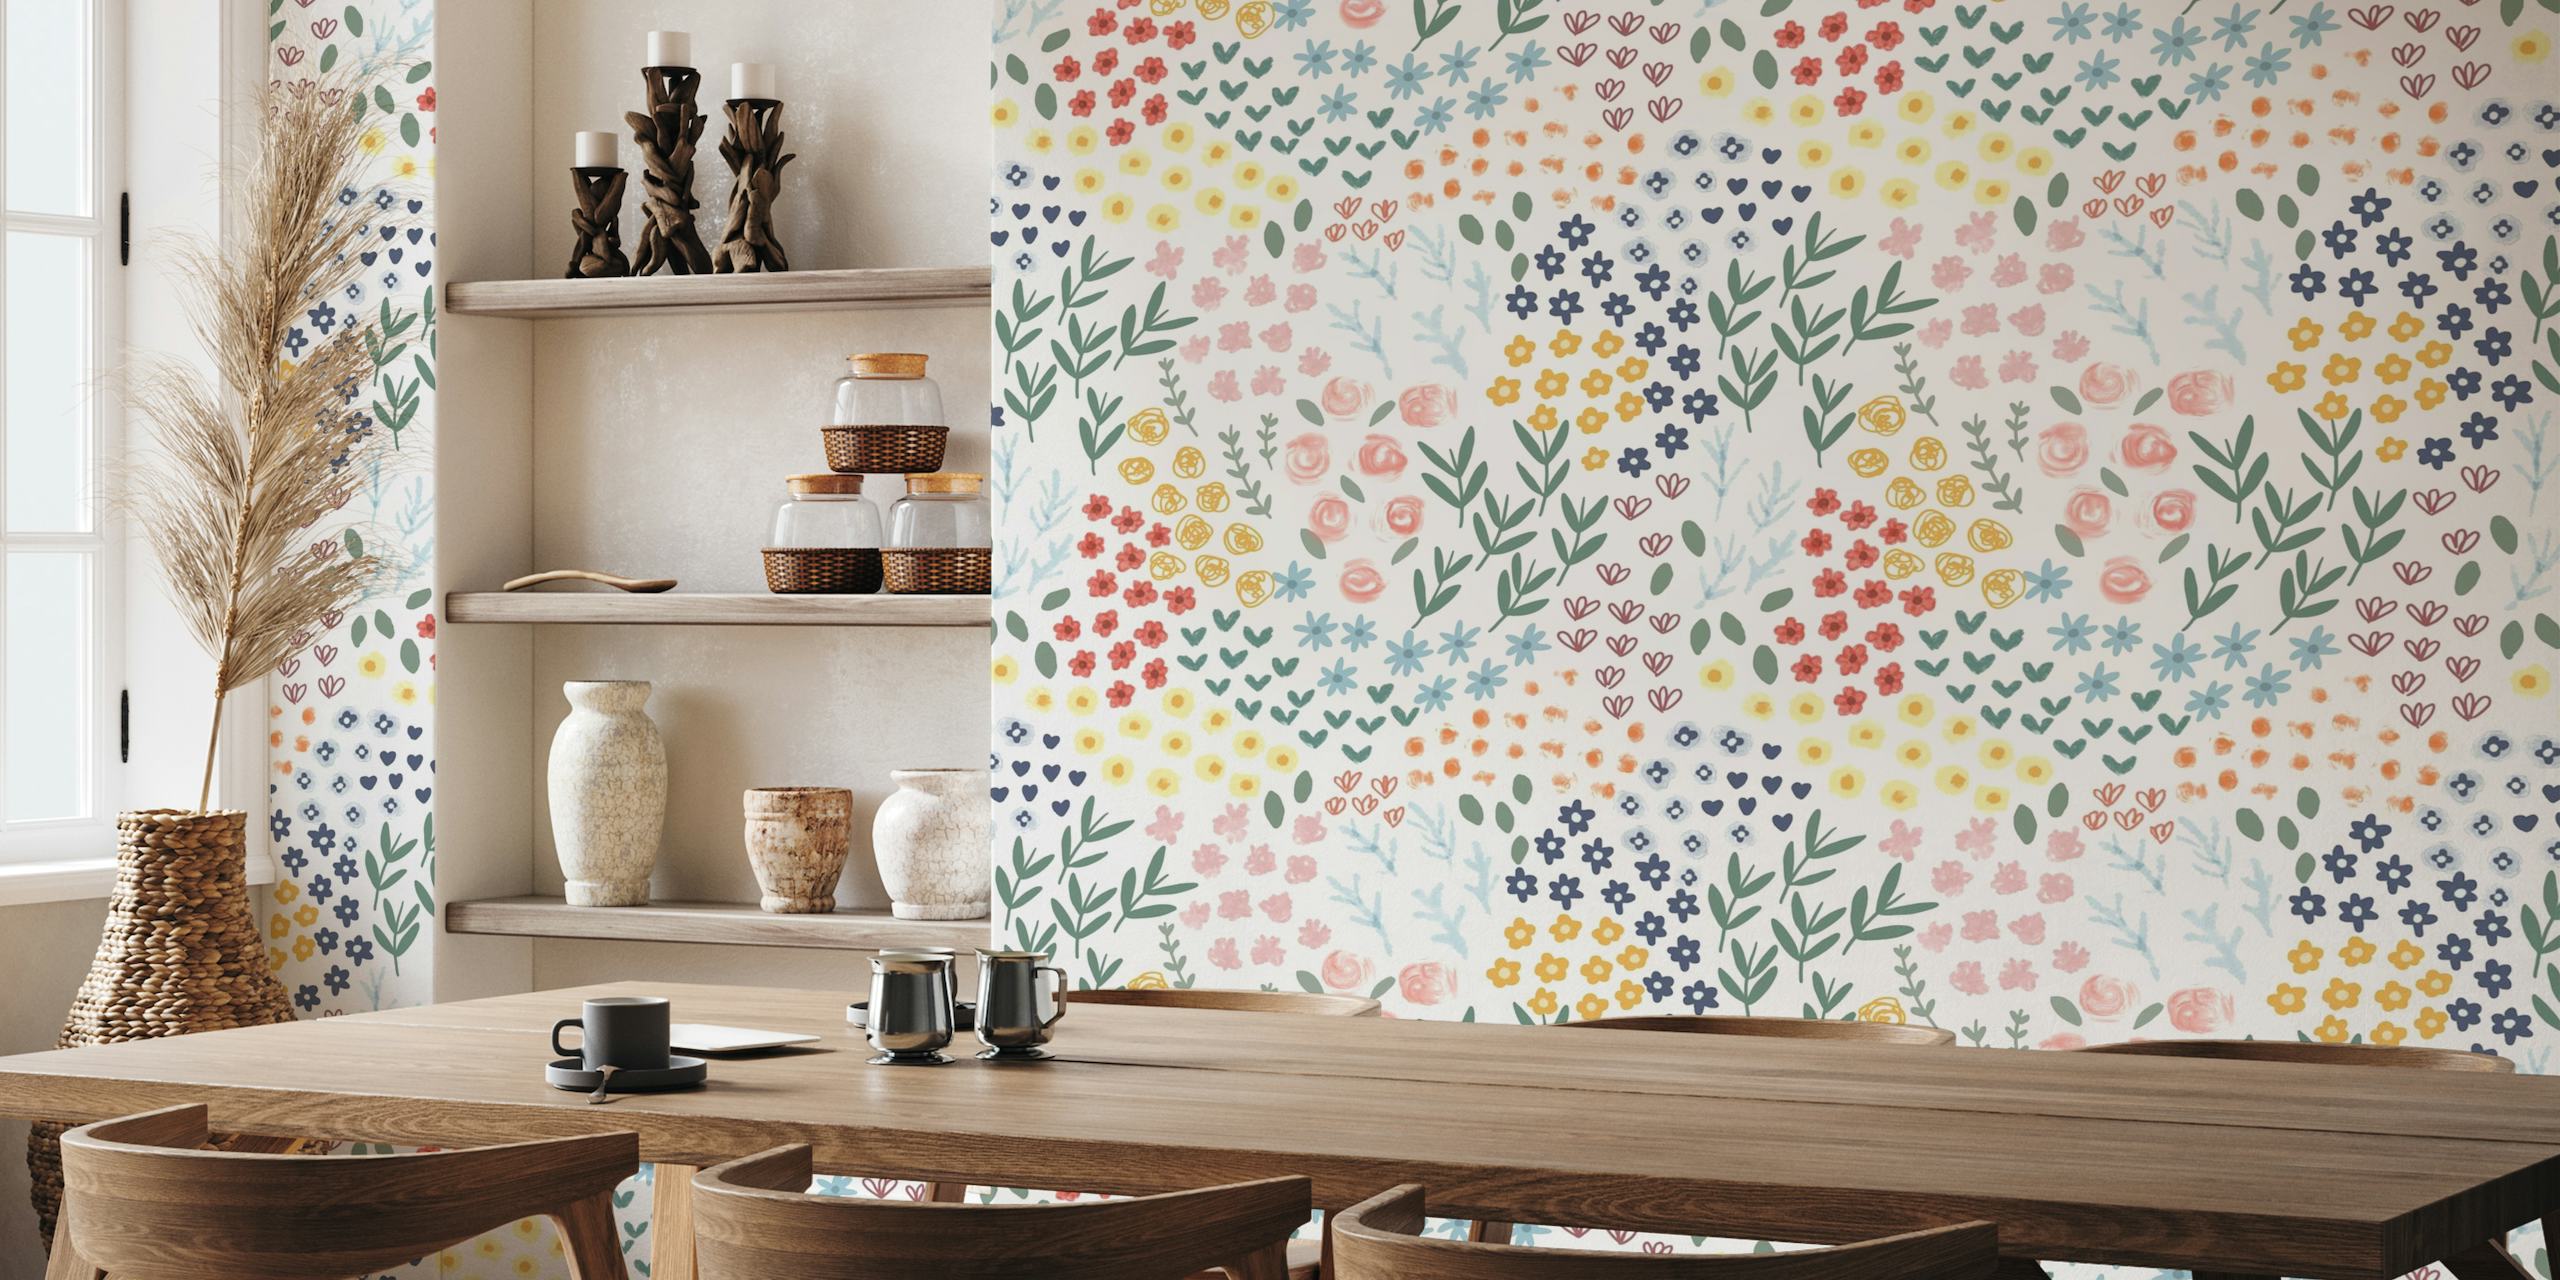 Patchwork Floral wall mural with a pastel palette of stylized flowers and botanicals